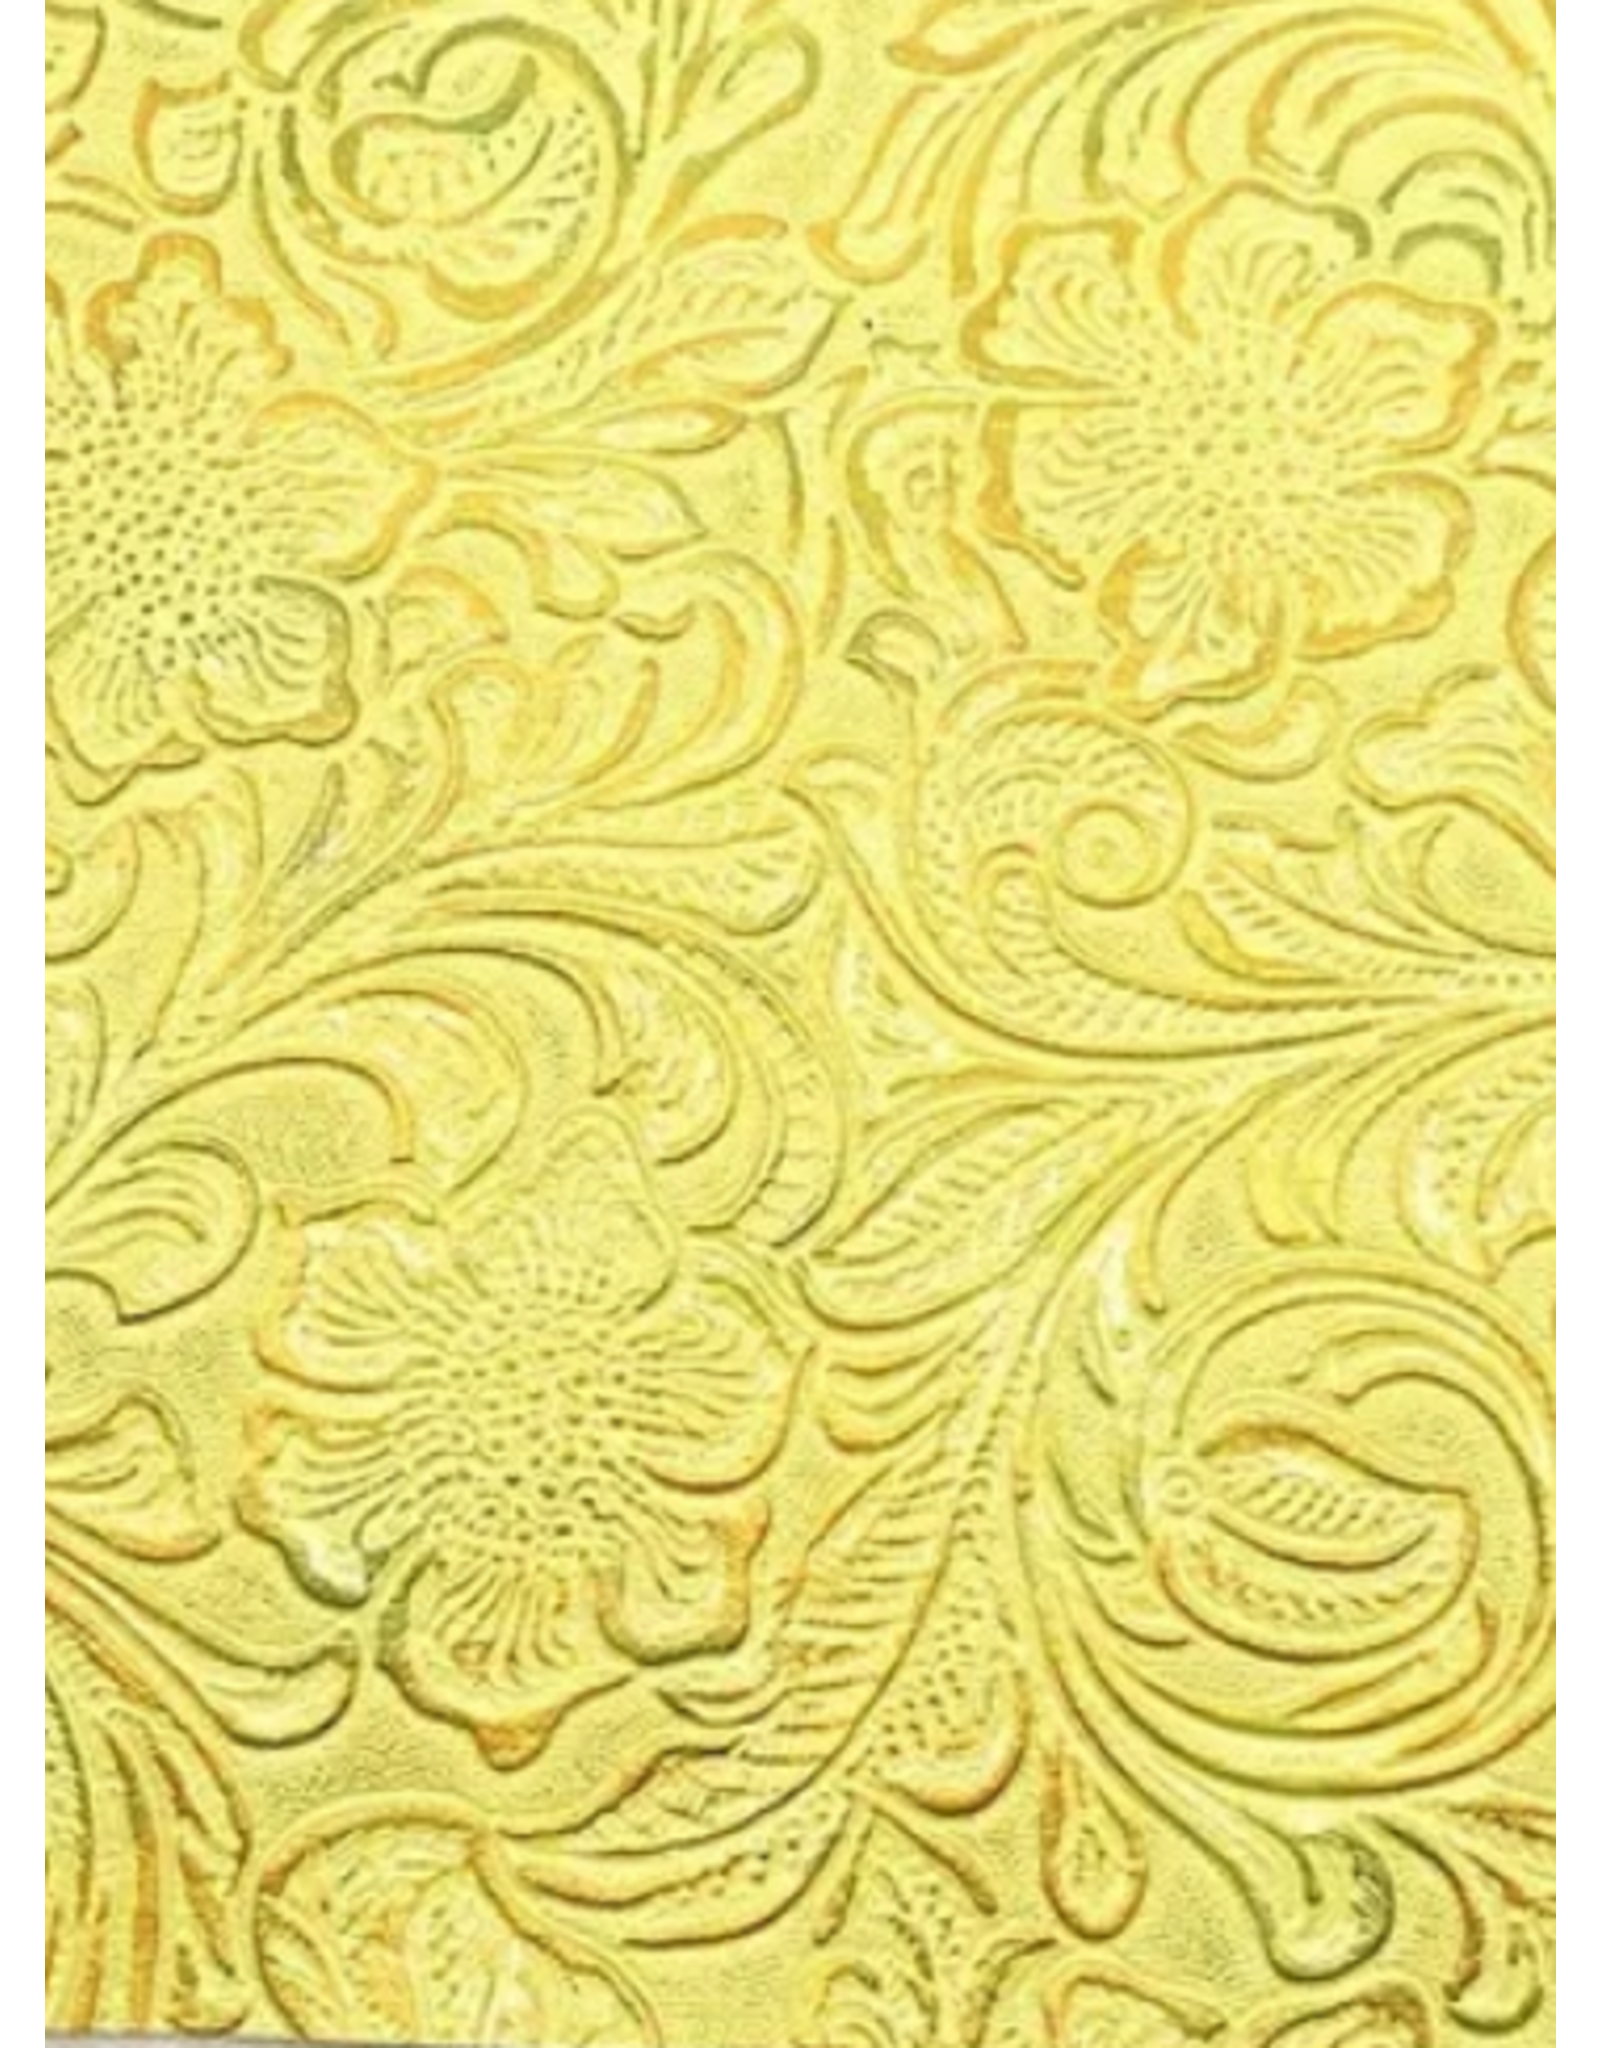 Faux Leather Beading Backing Yellow Copper Floral   .8mm thick 8x11"